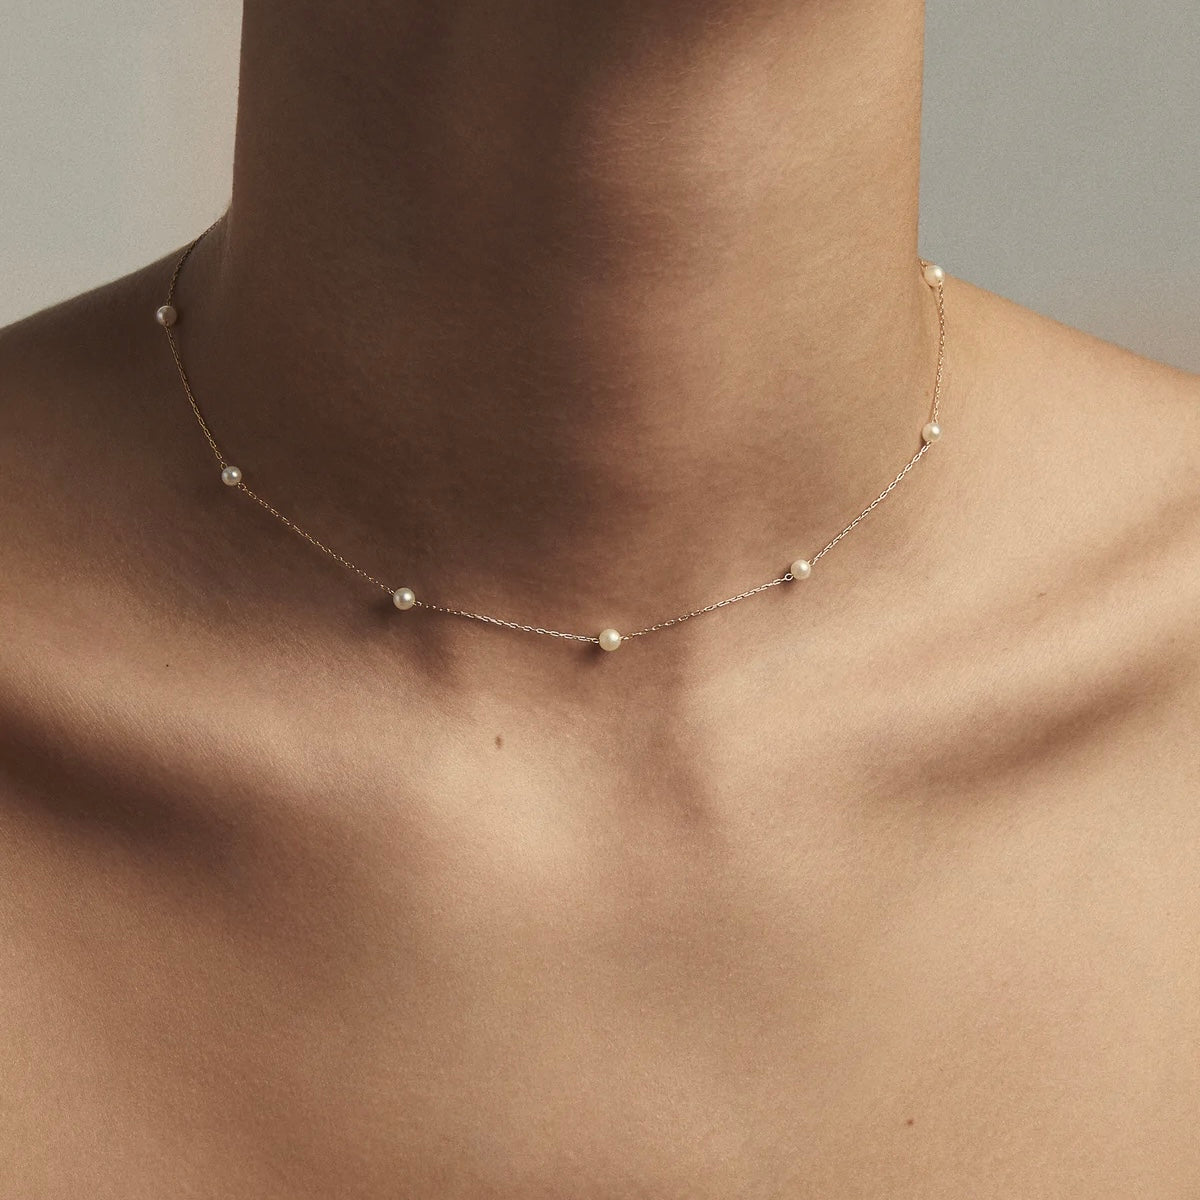 Floating Pearl Choker shown worn for size reference